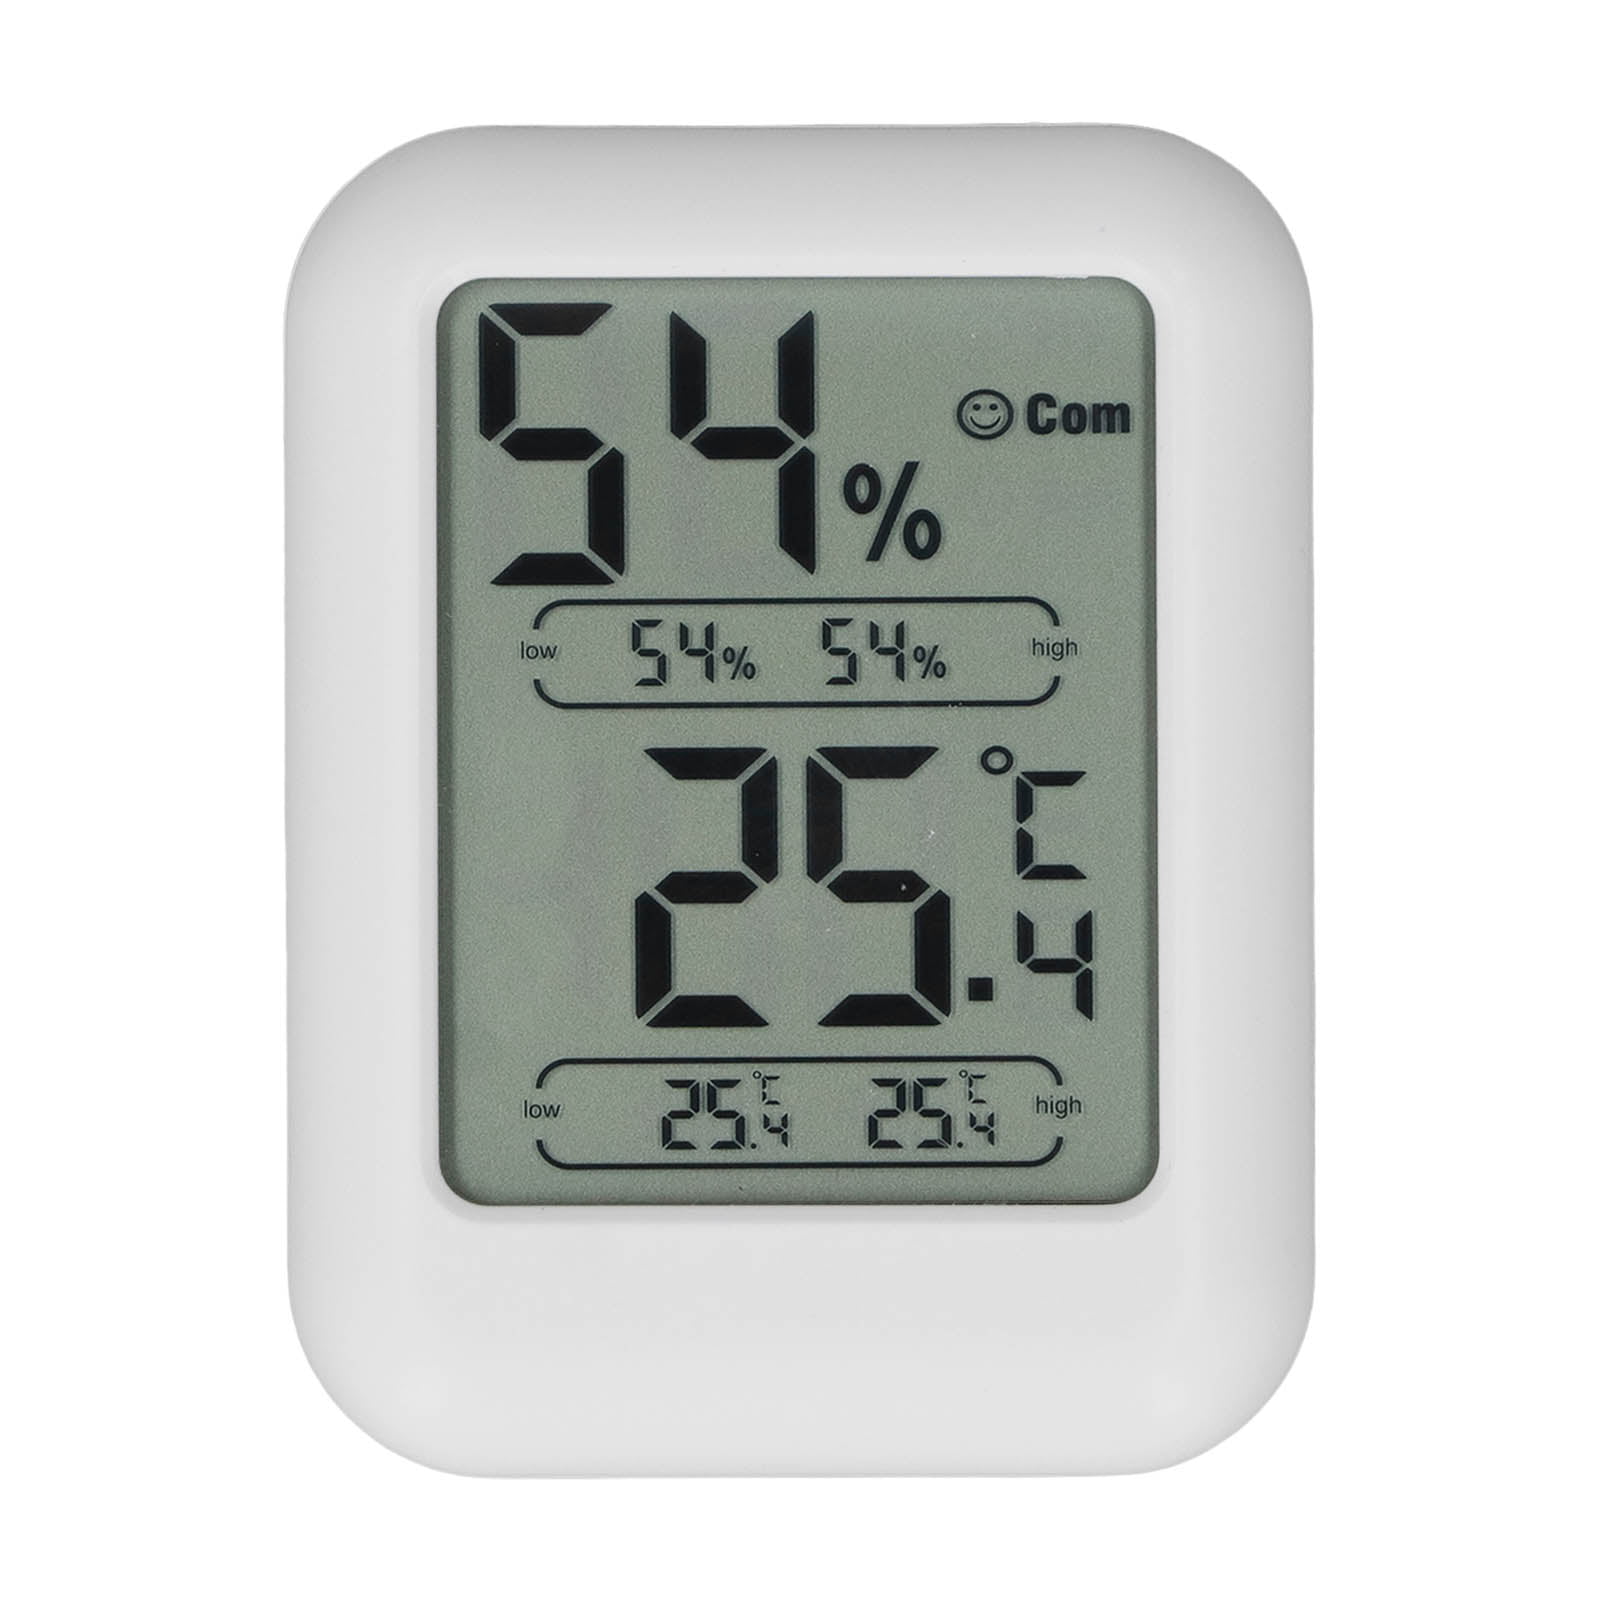 ADSX - Higrometer and thermometer for classroom/study room